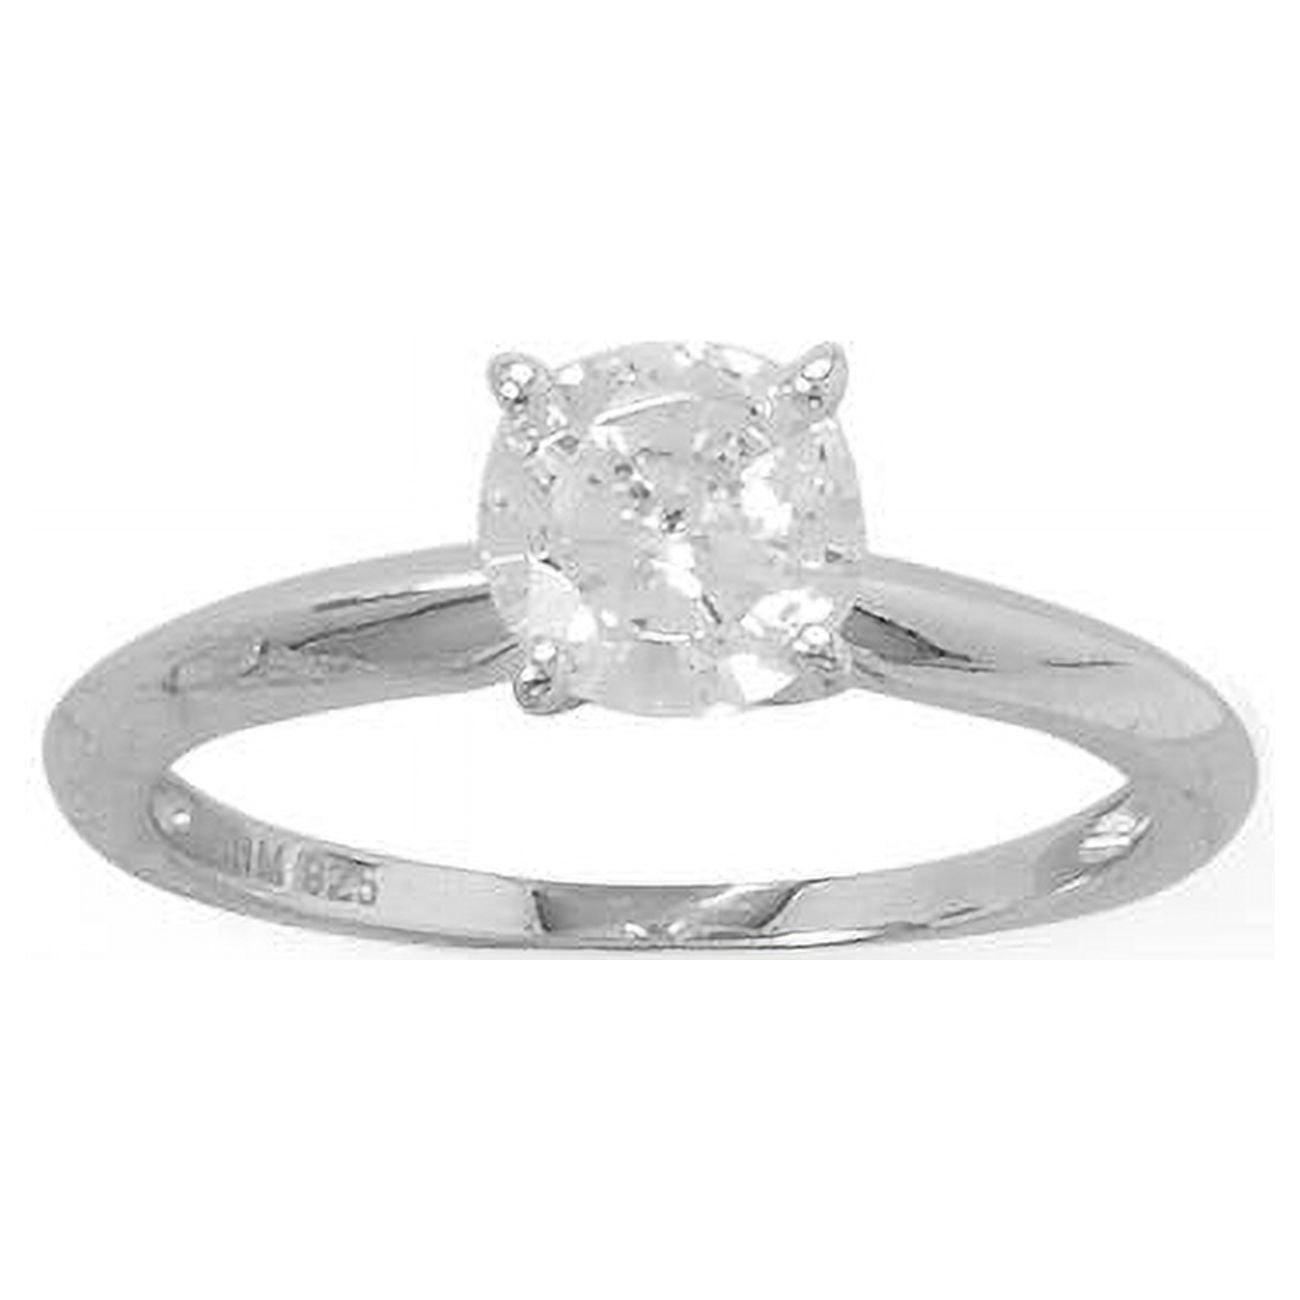 Picture of Precious Stars 83809-10 Sterling Silver Round-Cut Cubic Zirconia Solitaire Engagement Ring - Size 10